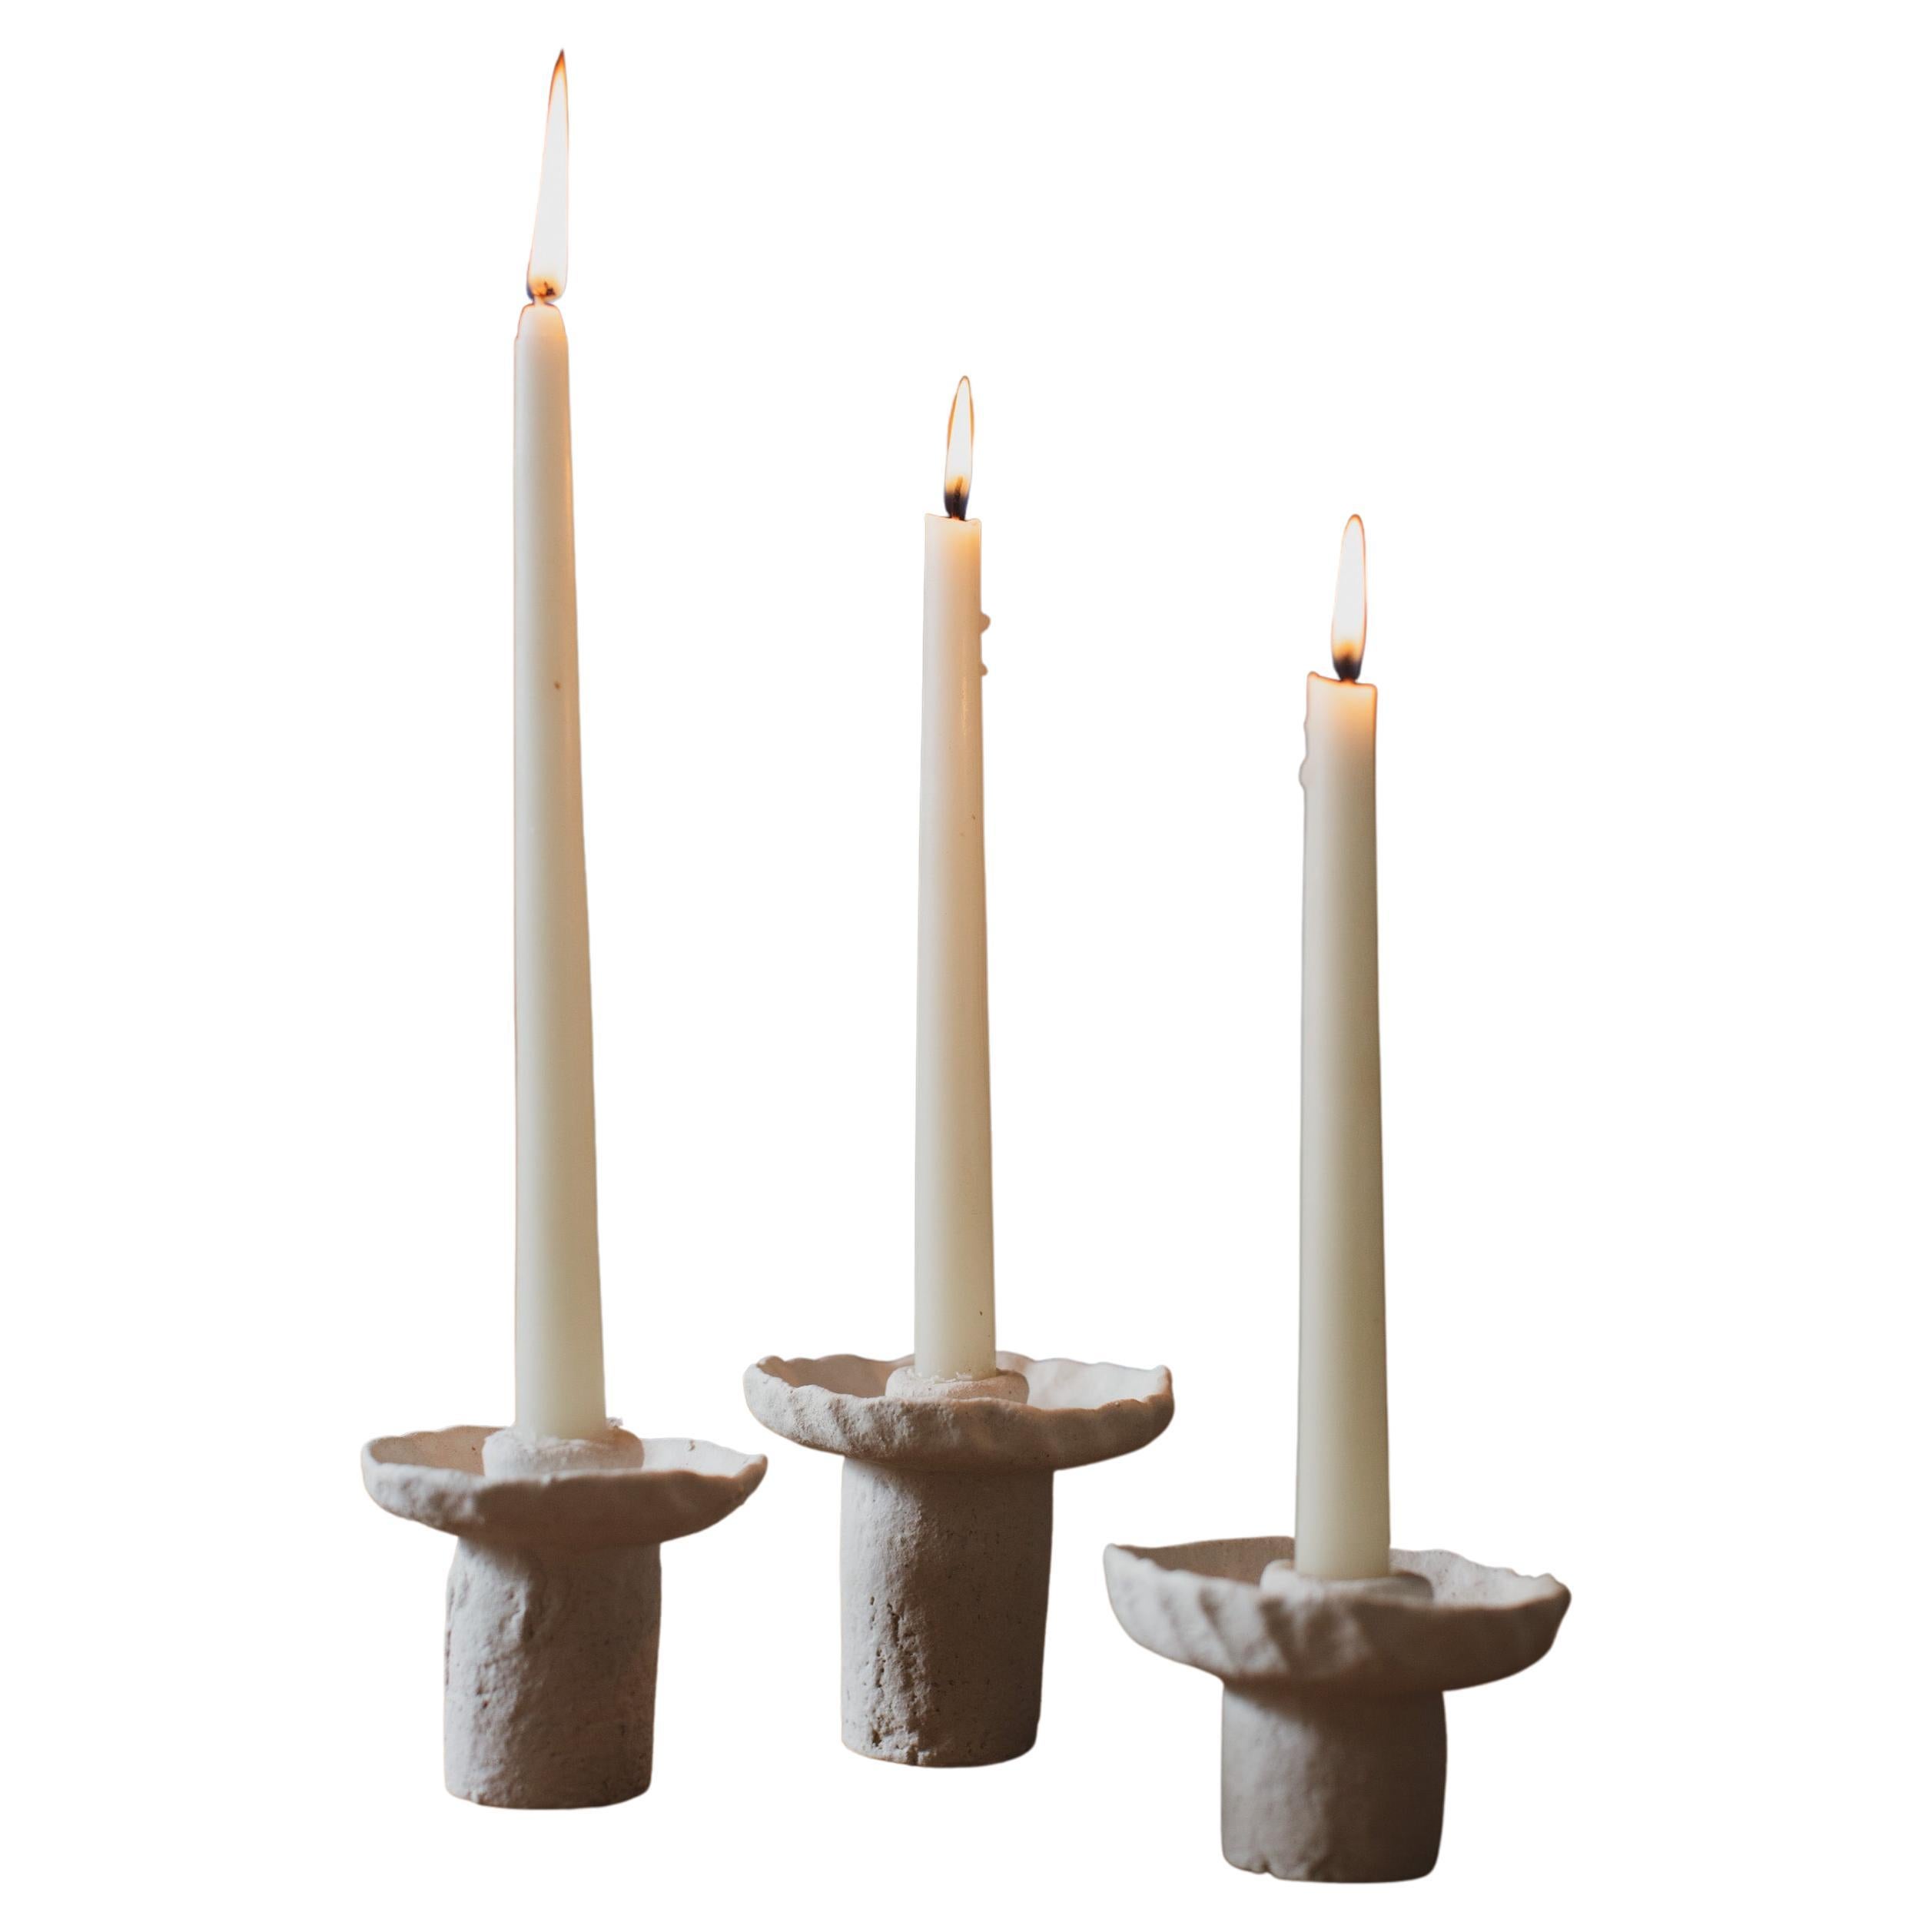 Handmade Ceramic Candlestick Holders by Mugly, NYC For Sale